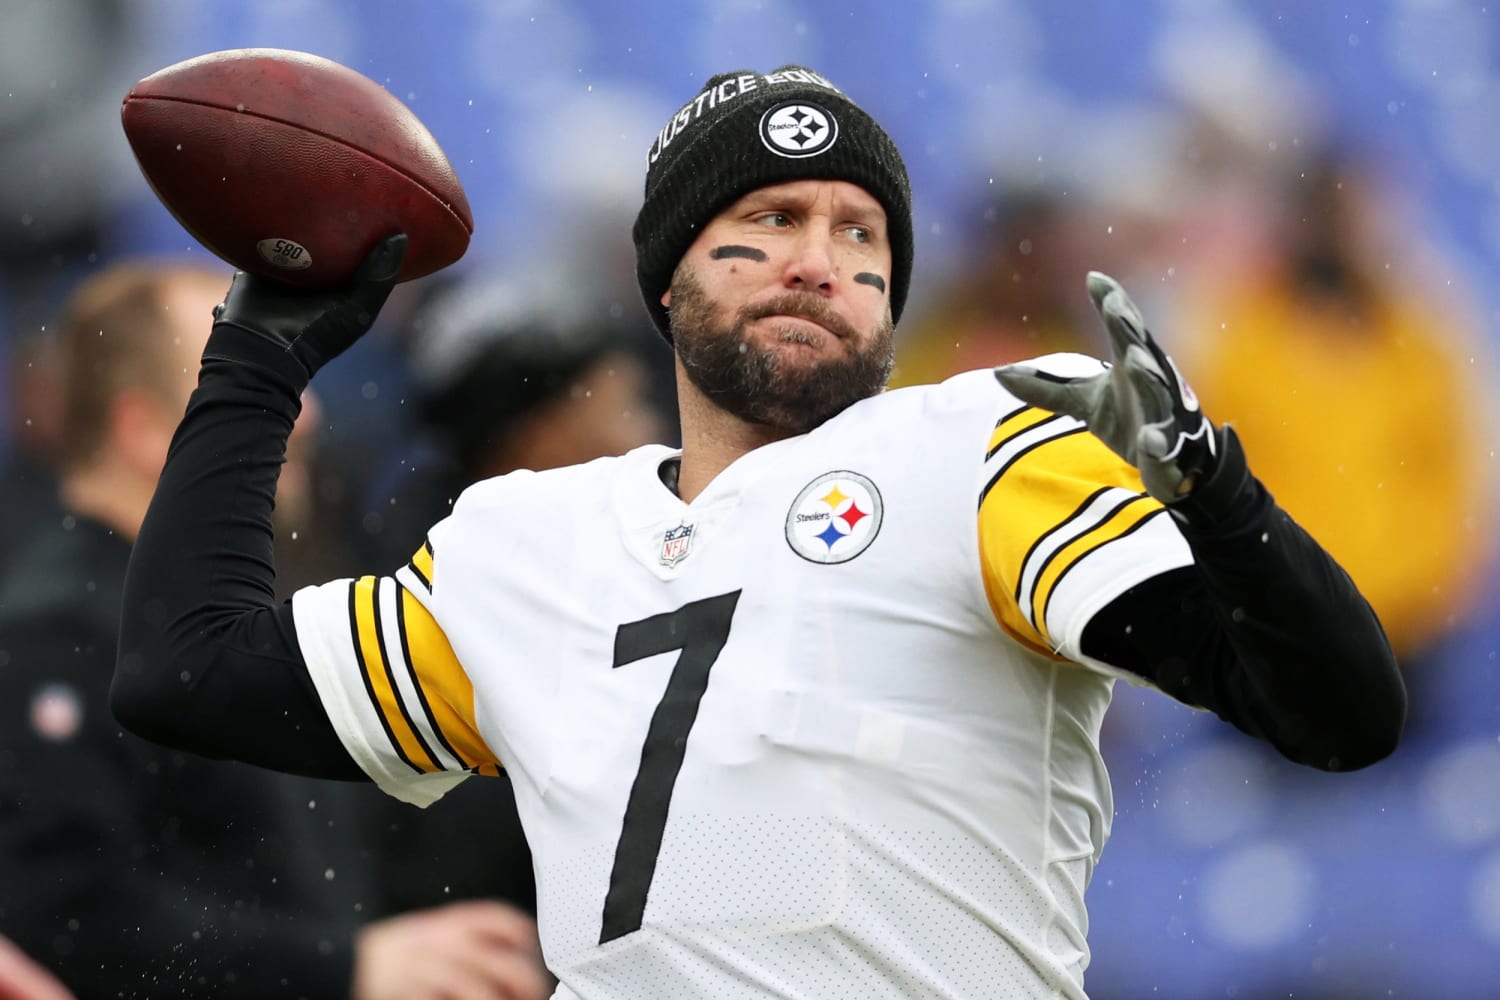 Ben Roethlisberger retires from NFL after 18 seasons with the Pittsburgh Steelers